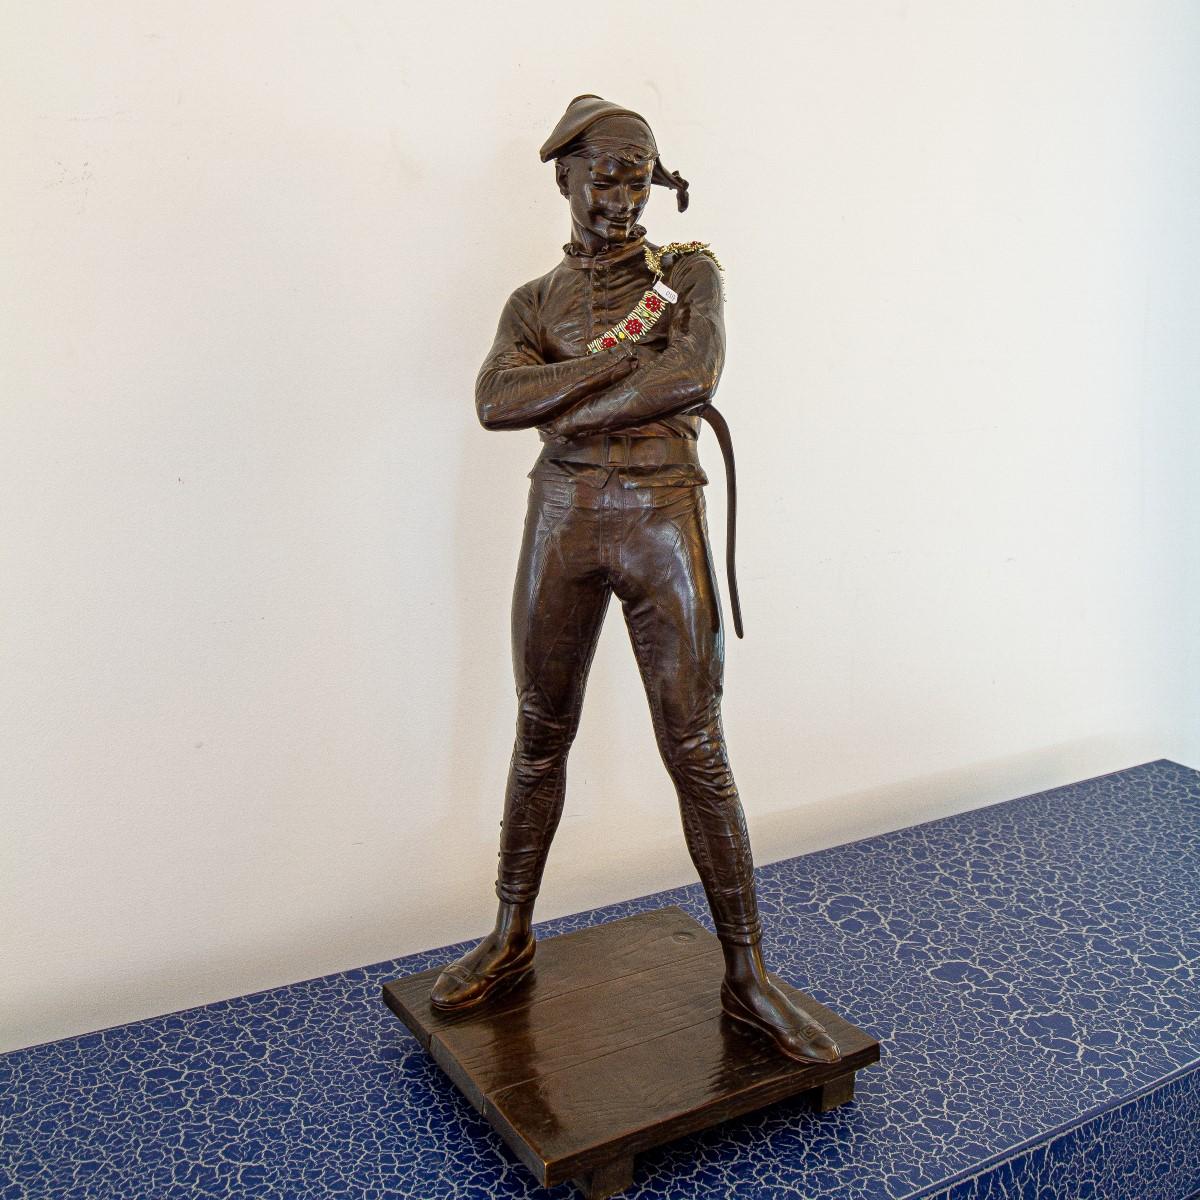 A late 19th century French bronze of a harlequin set on a bronze base simulating timber, after the model signed by René de Saint-Marceaux, stamped F Barbedienne Foundry, Paris and dated 1879, editioned 636 and complete with the A. Collas